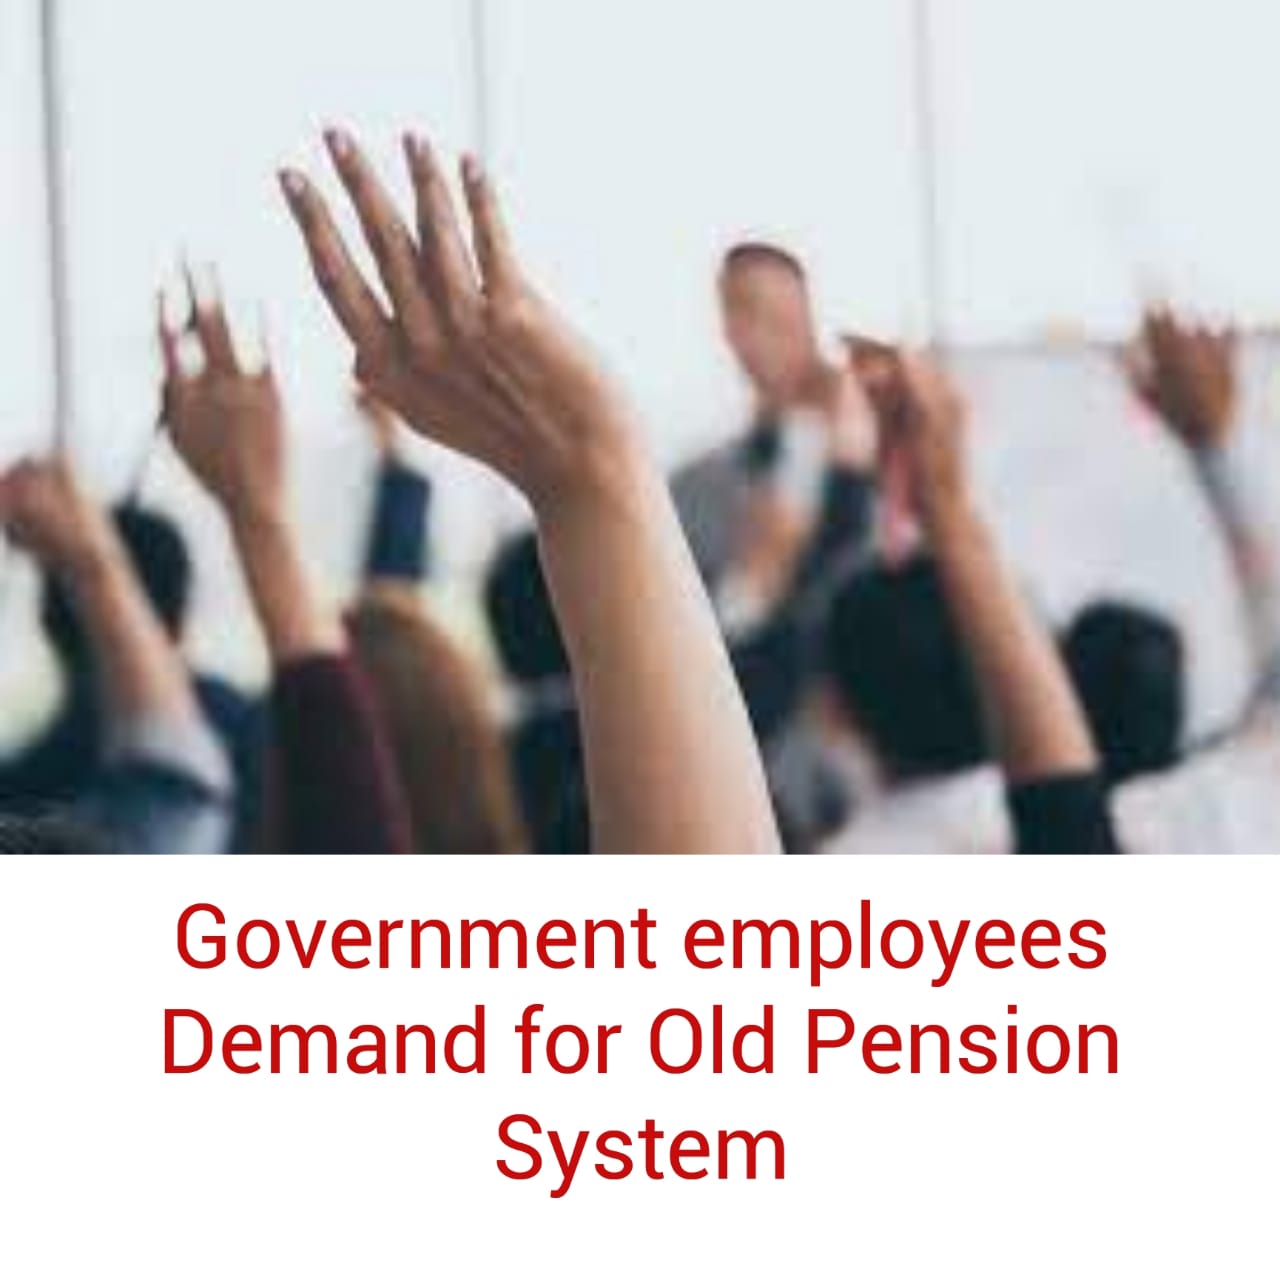 GOVERNMENT EMPLOYEES DEMAND FOR OLD PENSION SYSTEM